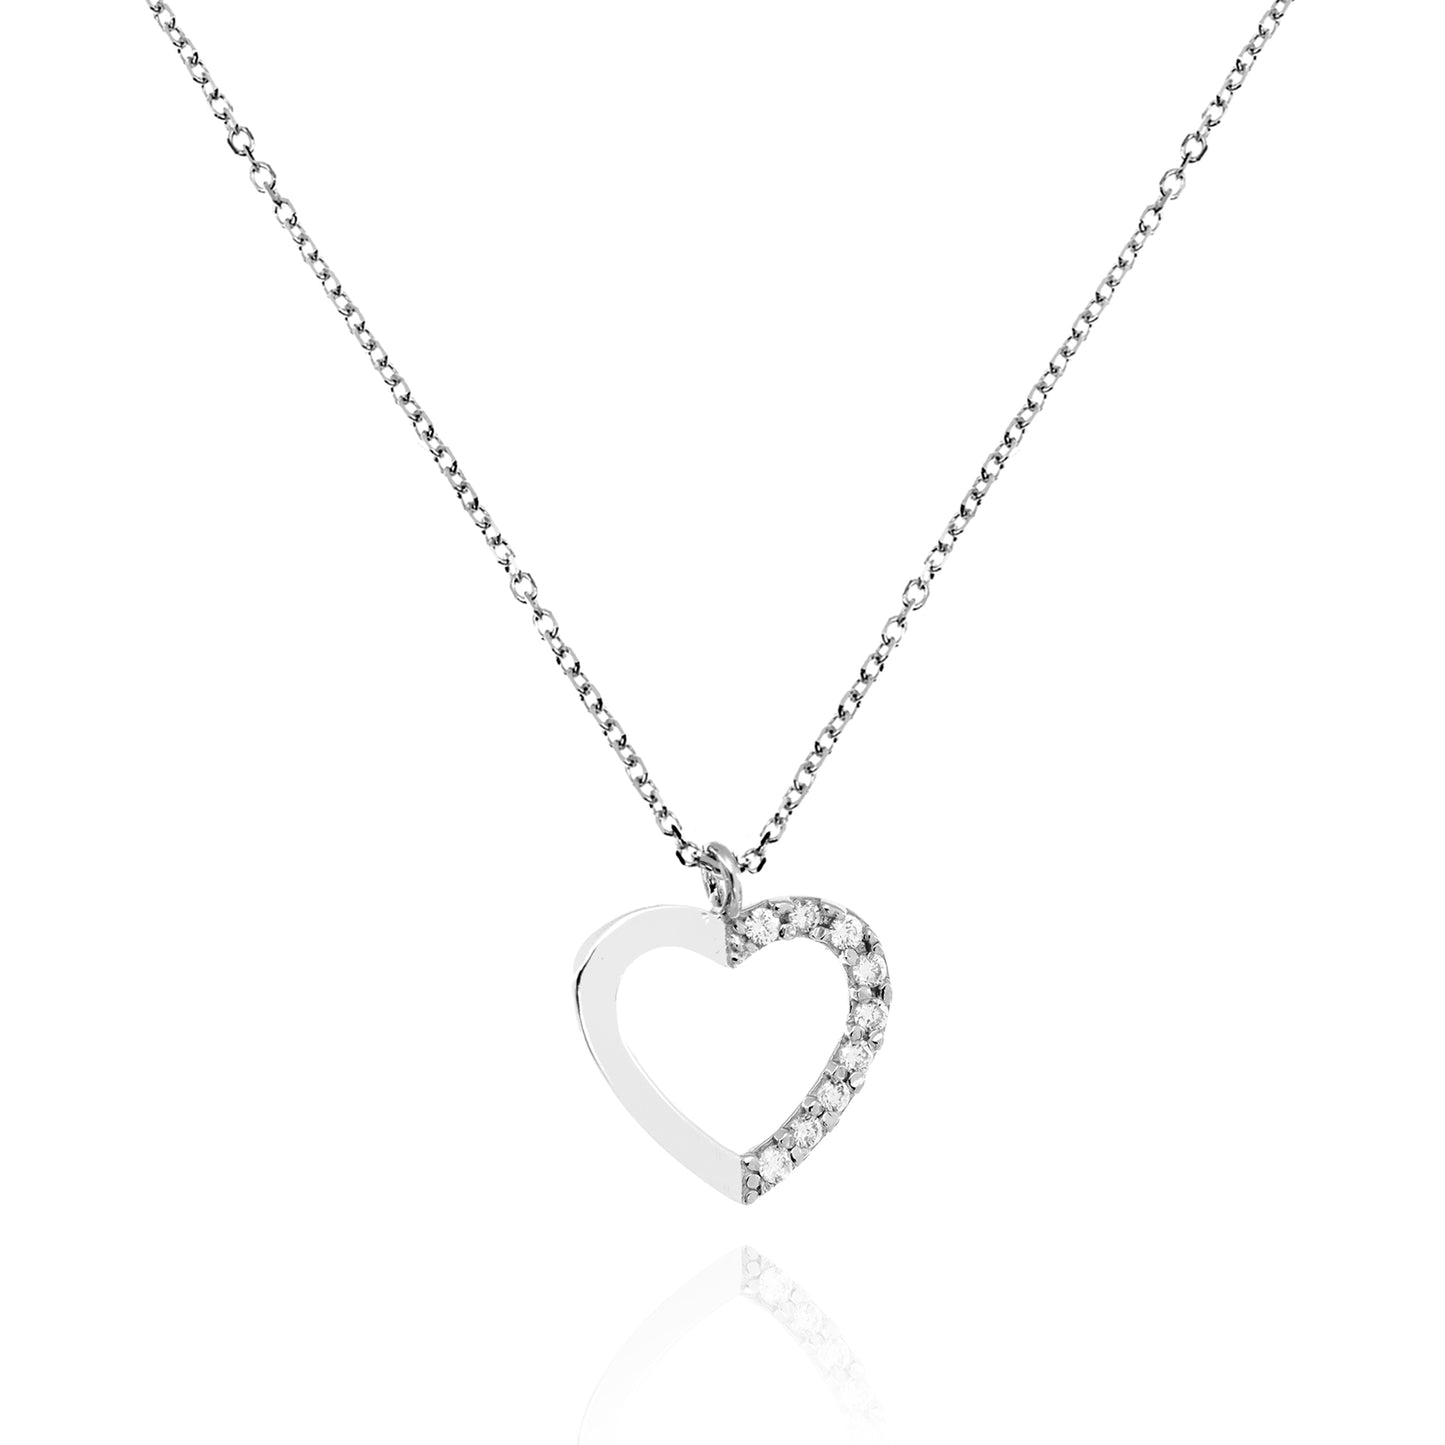 Real Gold Heart Necklace with 100% Natural Diamonds P.Ct 5